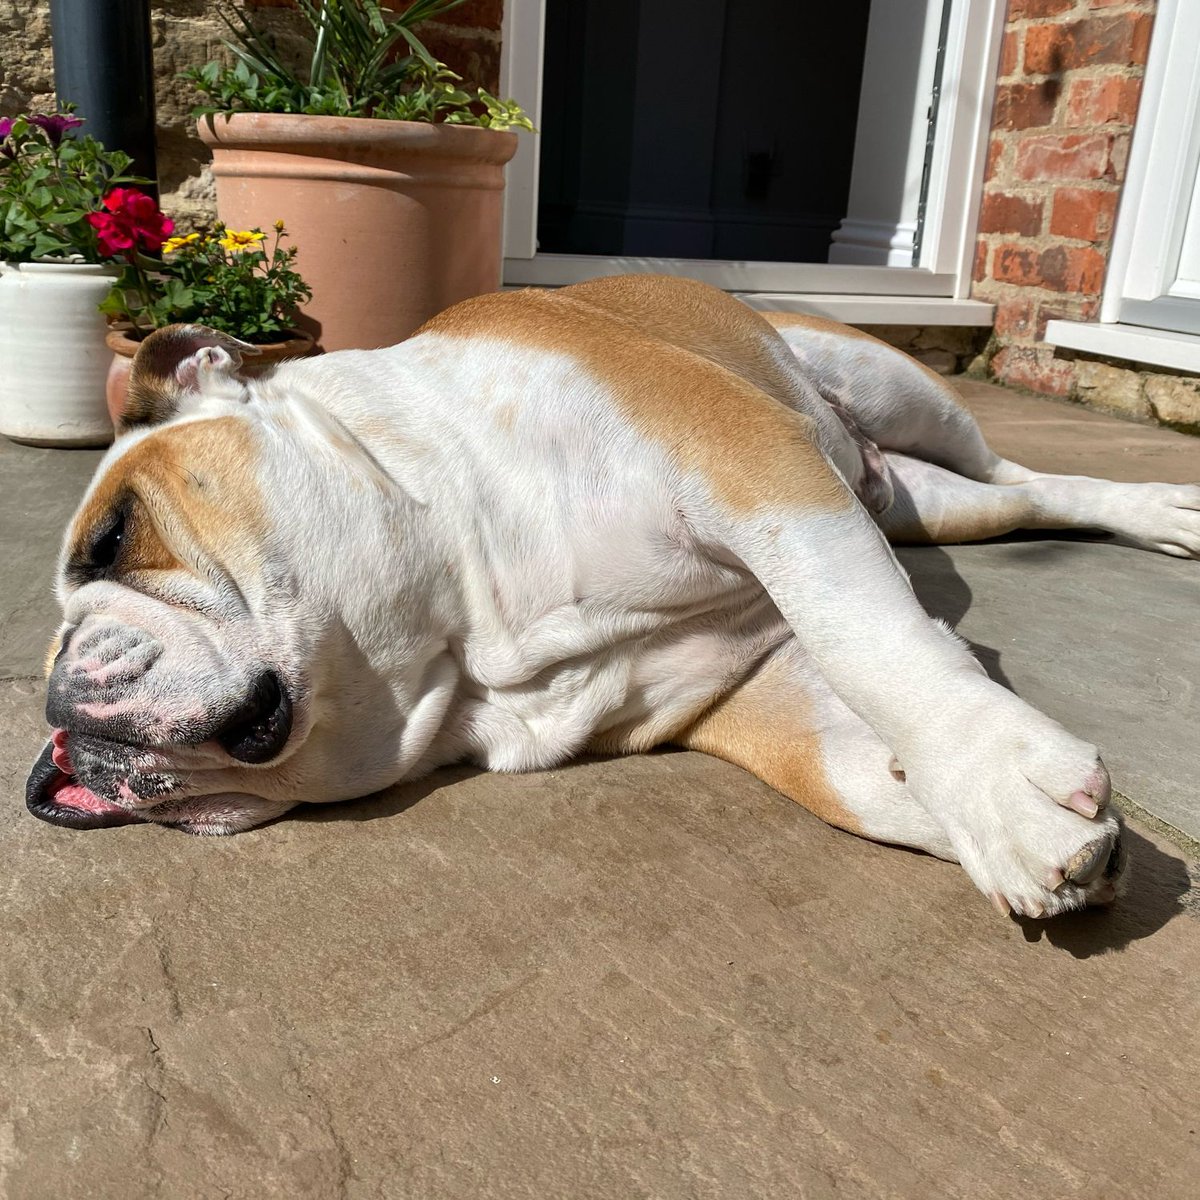 We’ve had a big uptick in the weather and I’ve found myself a #SunPuddle ☀️ for the weekend - I hope there’s sun where you are, happy #FriYAY 🐶🐾❤️ Barney #BarneyTheBulldog #DogsOfTwitter #DogsOfX #DogsOfIG #DogsOfFacebook #Bulldog #EnglishBulldog #Outdoors #Sun